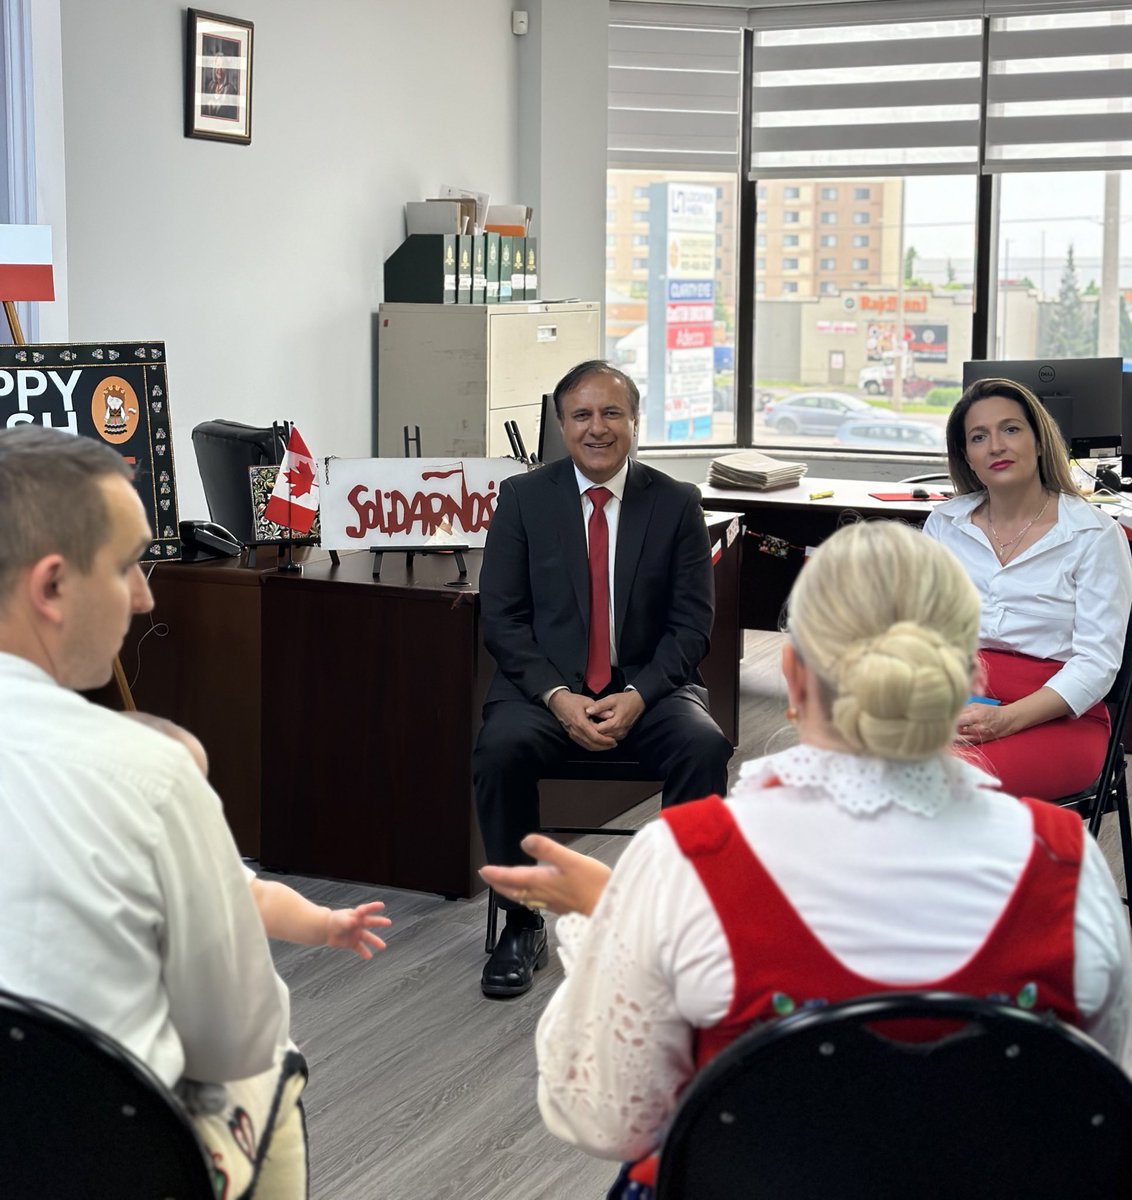 Today I invited the Polish Community to celebrate and honour the rich culture, history, and contributions of the Polish community in Canada.

#PolishHeritage #CelebrateDiversity